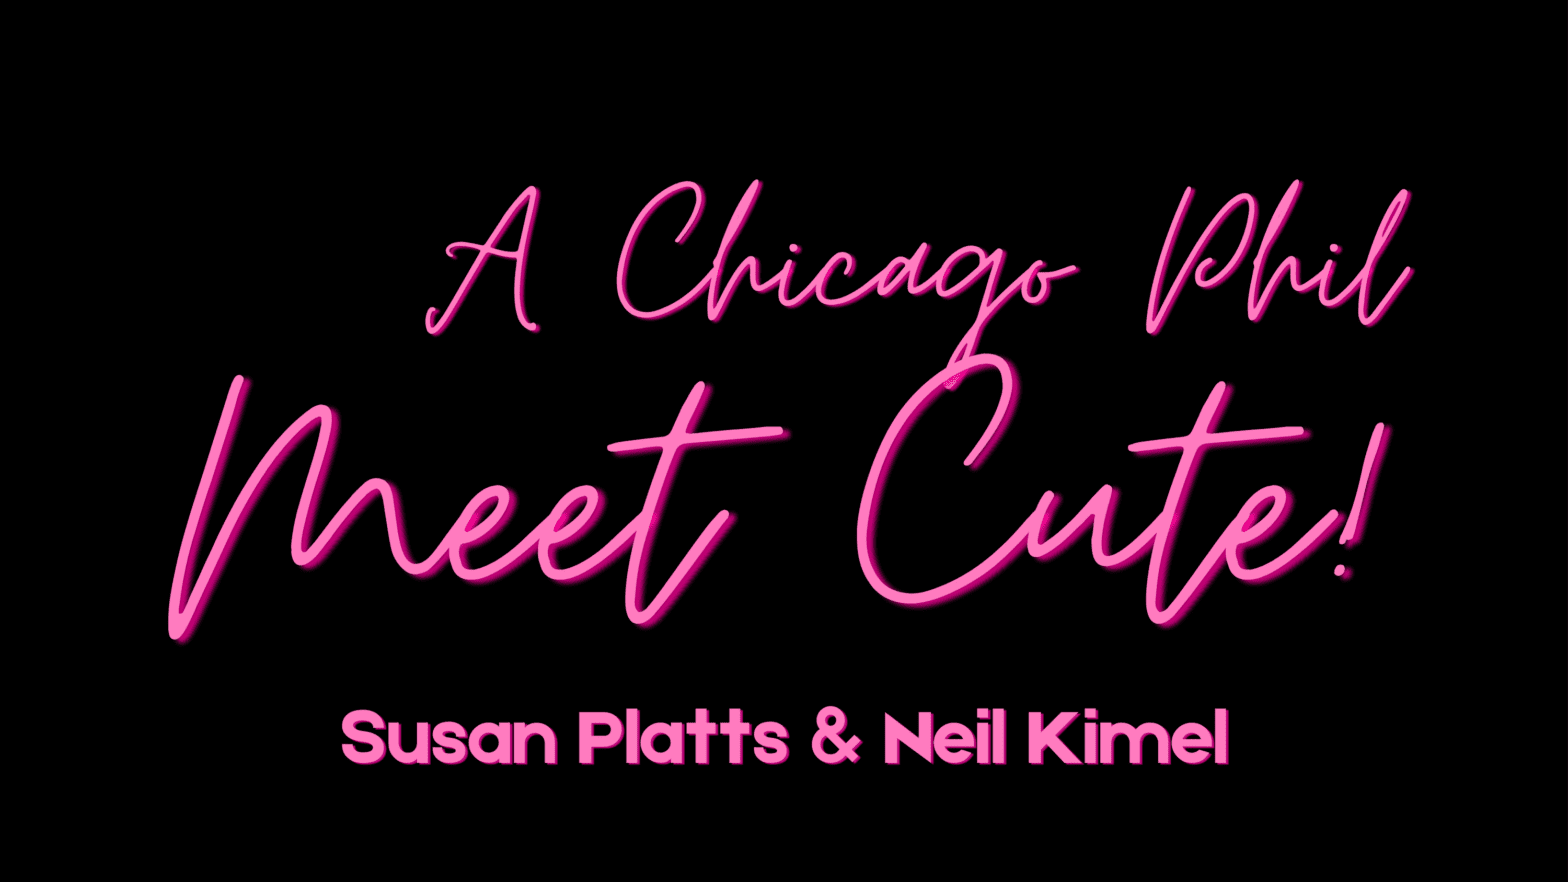 Featured image for post: A Chicago Philharmonic Meet Cute: Susan Platts & Neil Kimel